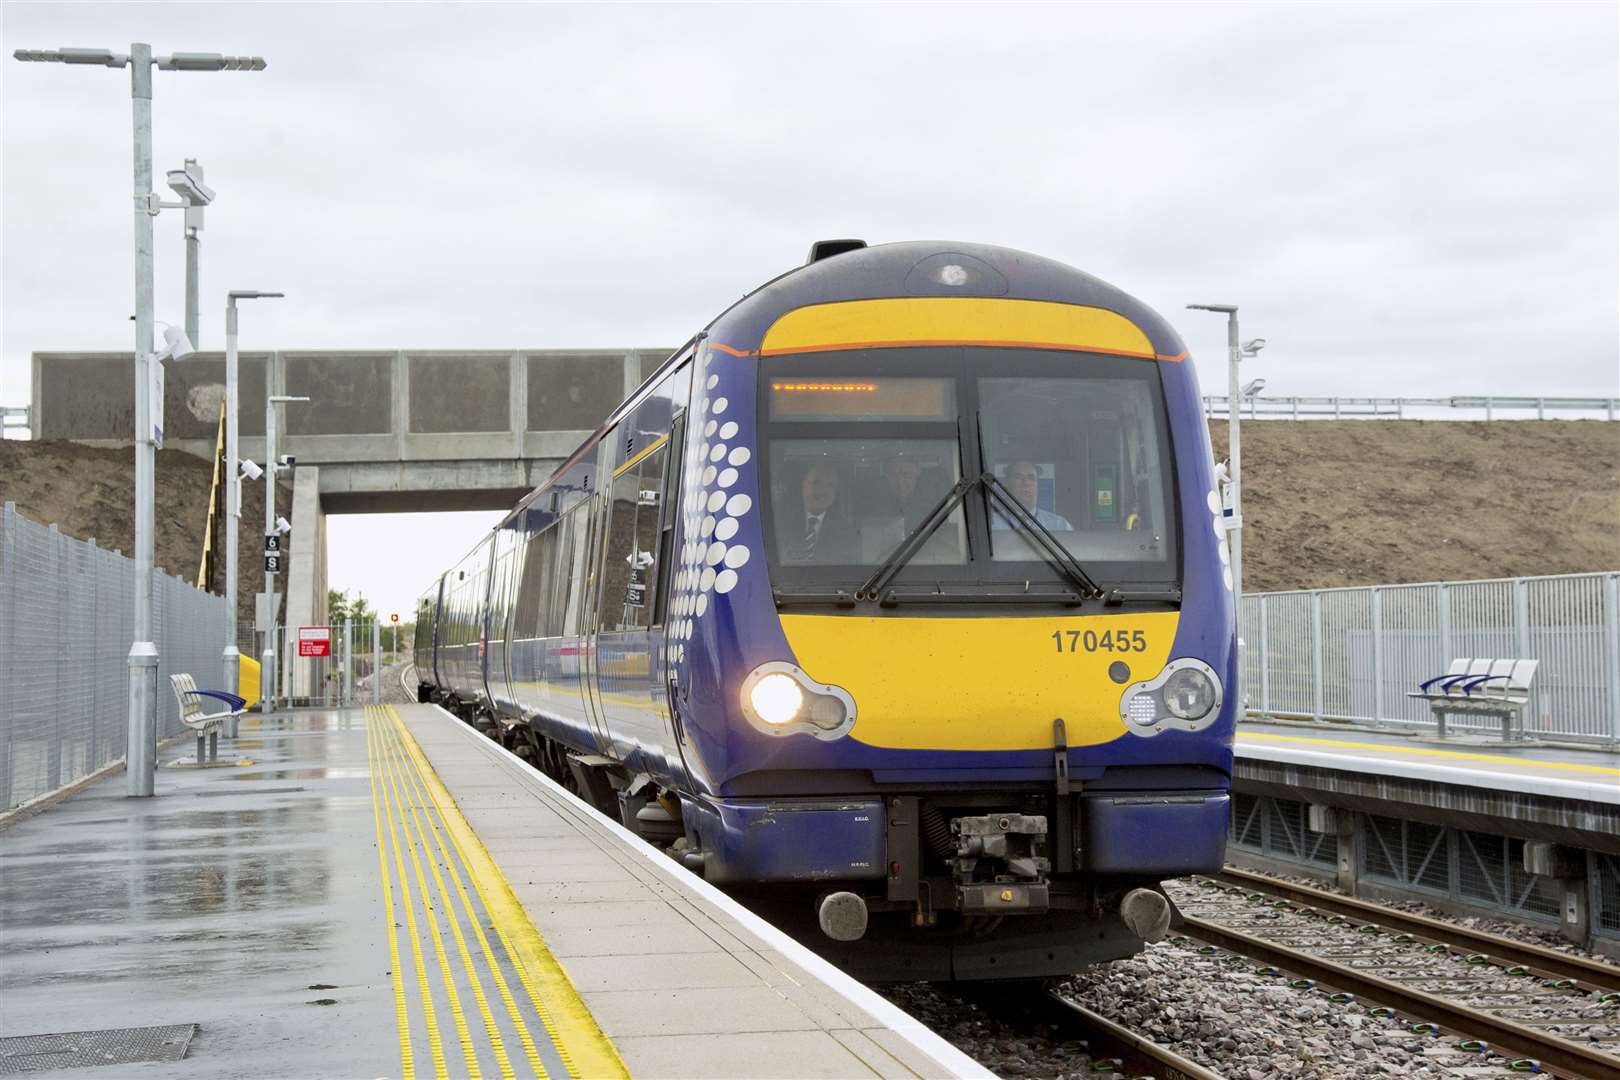 A ScotRail train on the Inverness-Aberdeen line at Forres. Picture: Daniel Forsyth. Image No.039367.